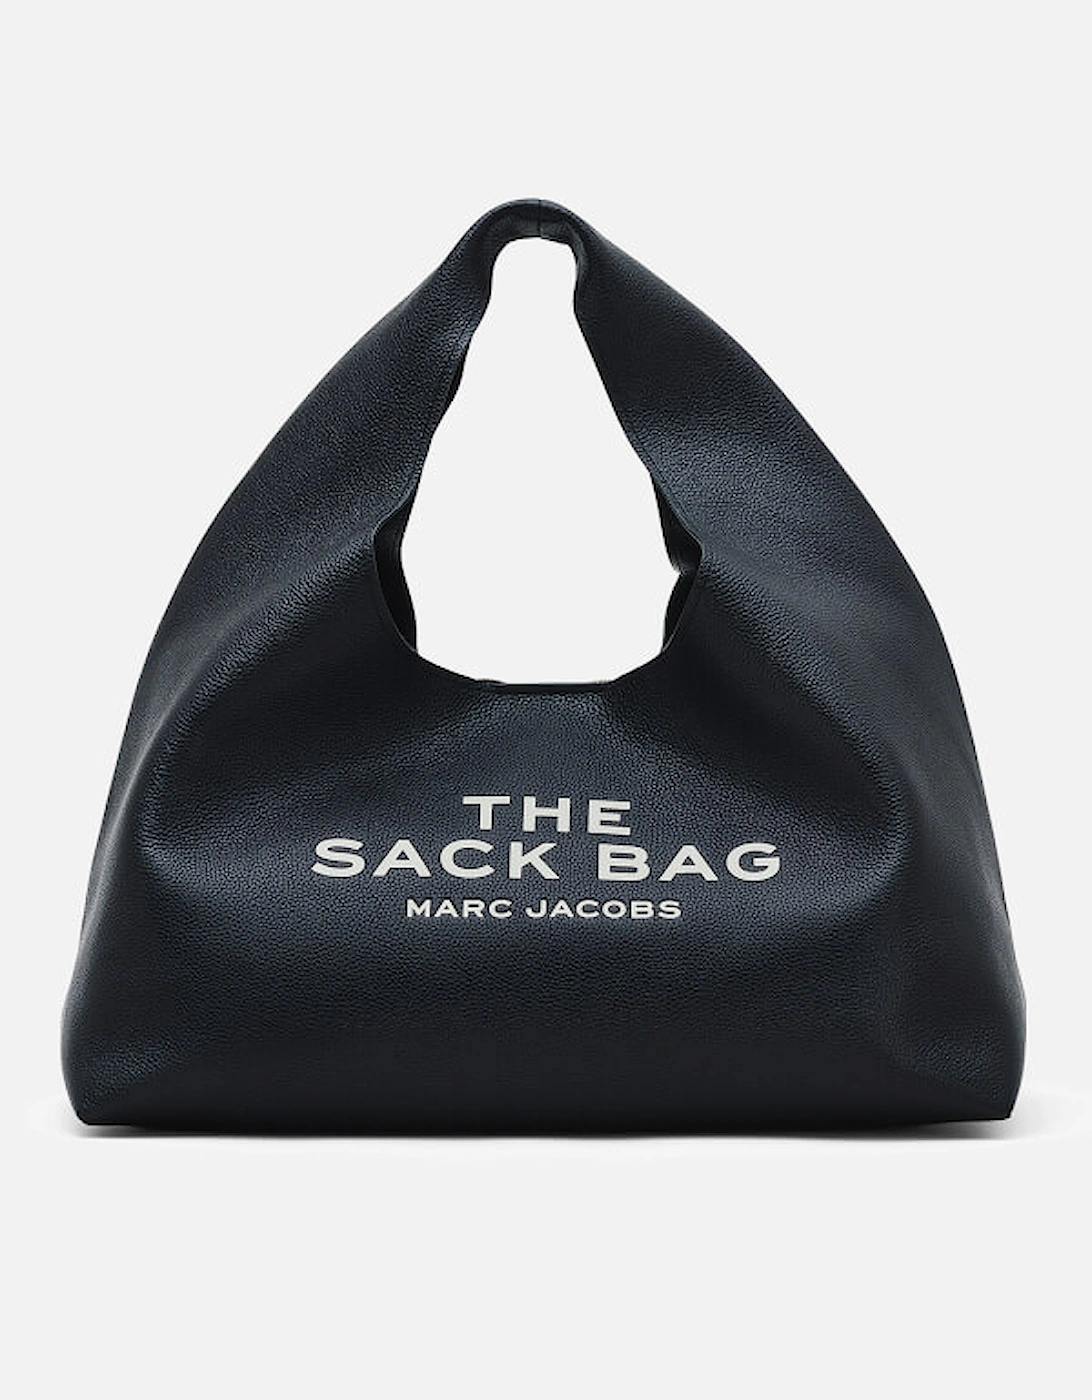 The XL Leather Sack Bag, 2 of 1